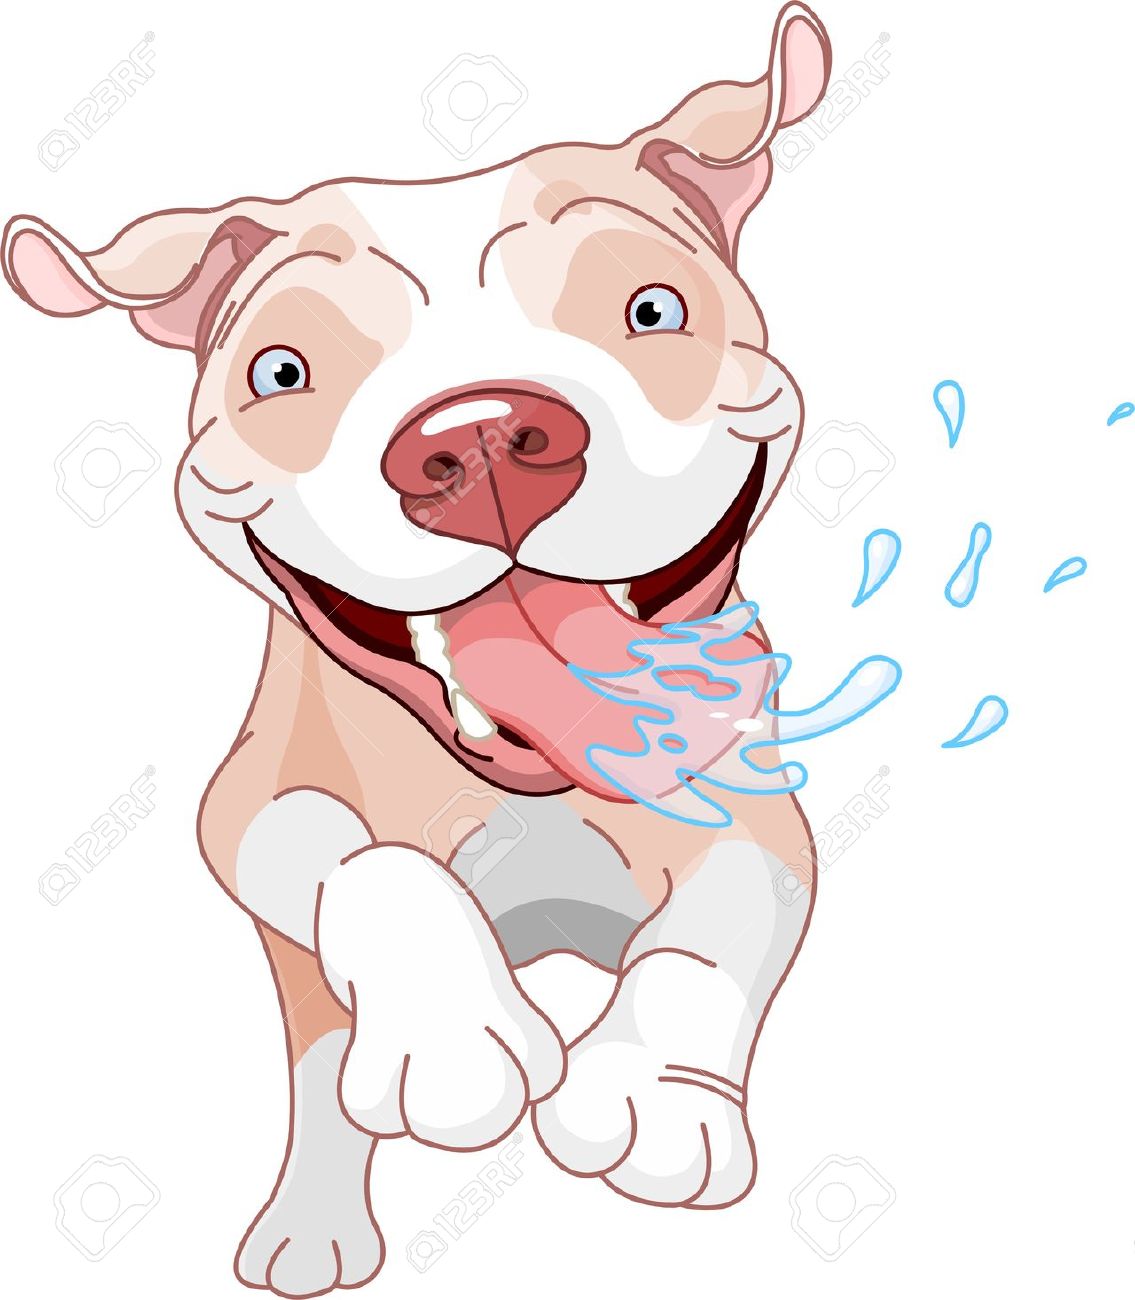 Pit Bull clipart #14, Download drawings